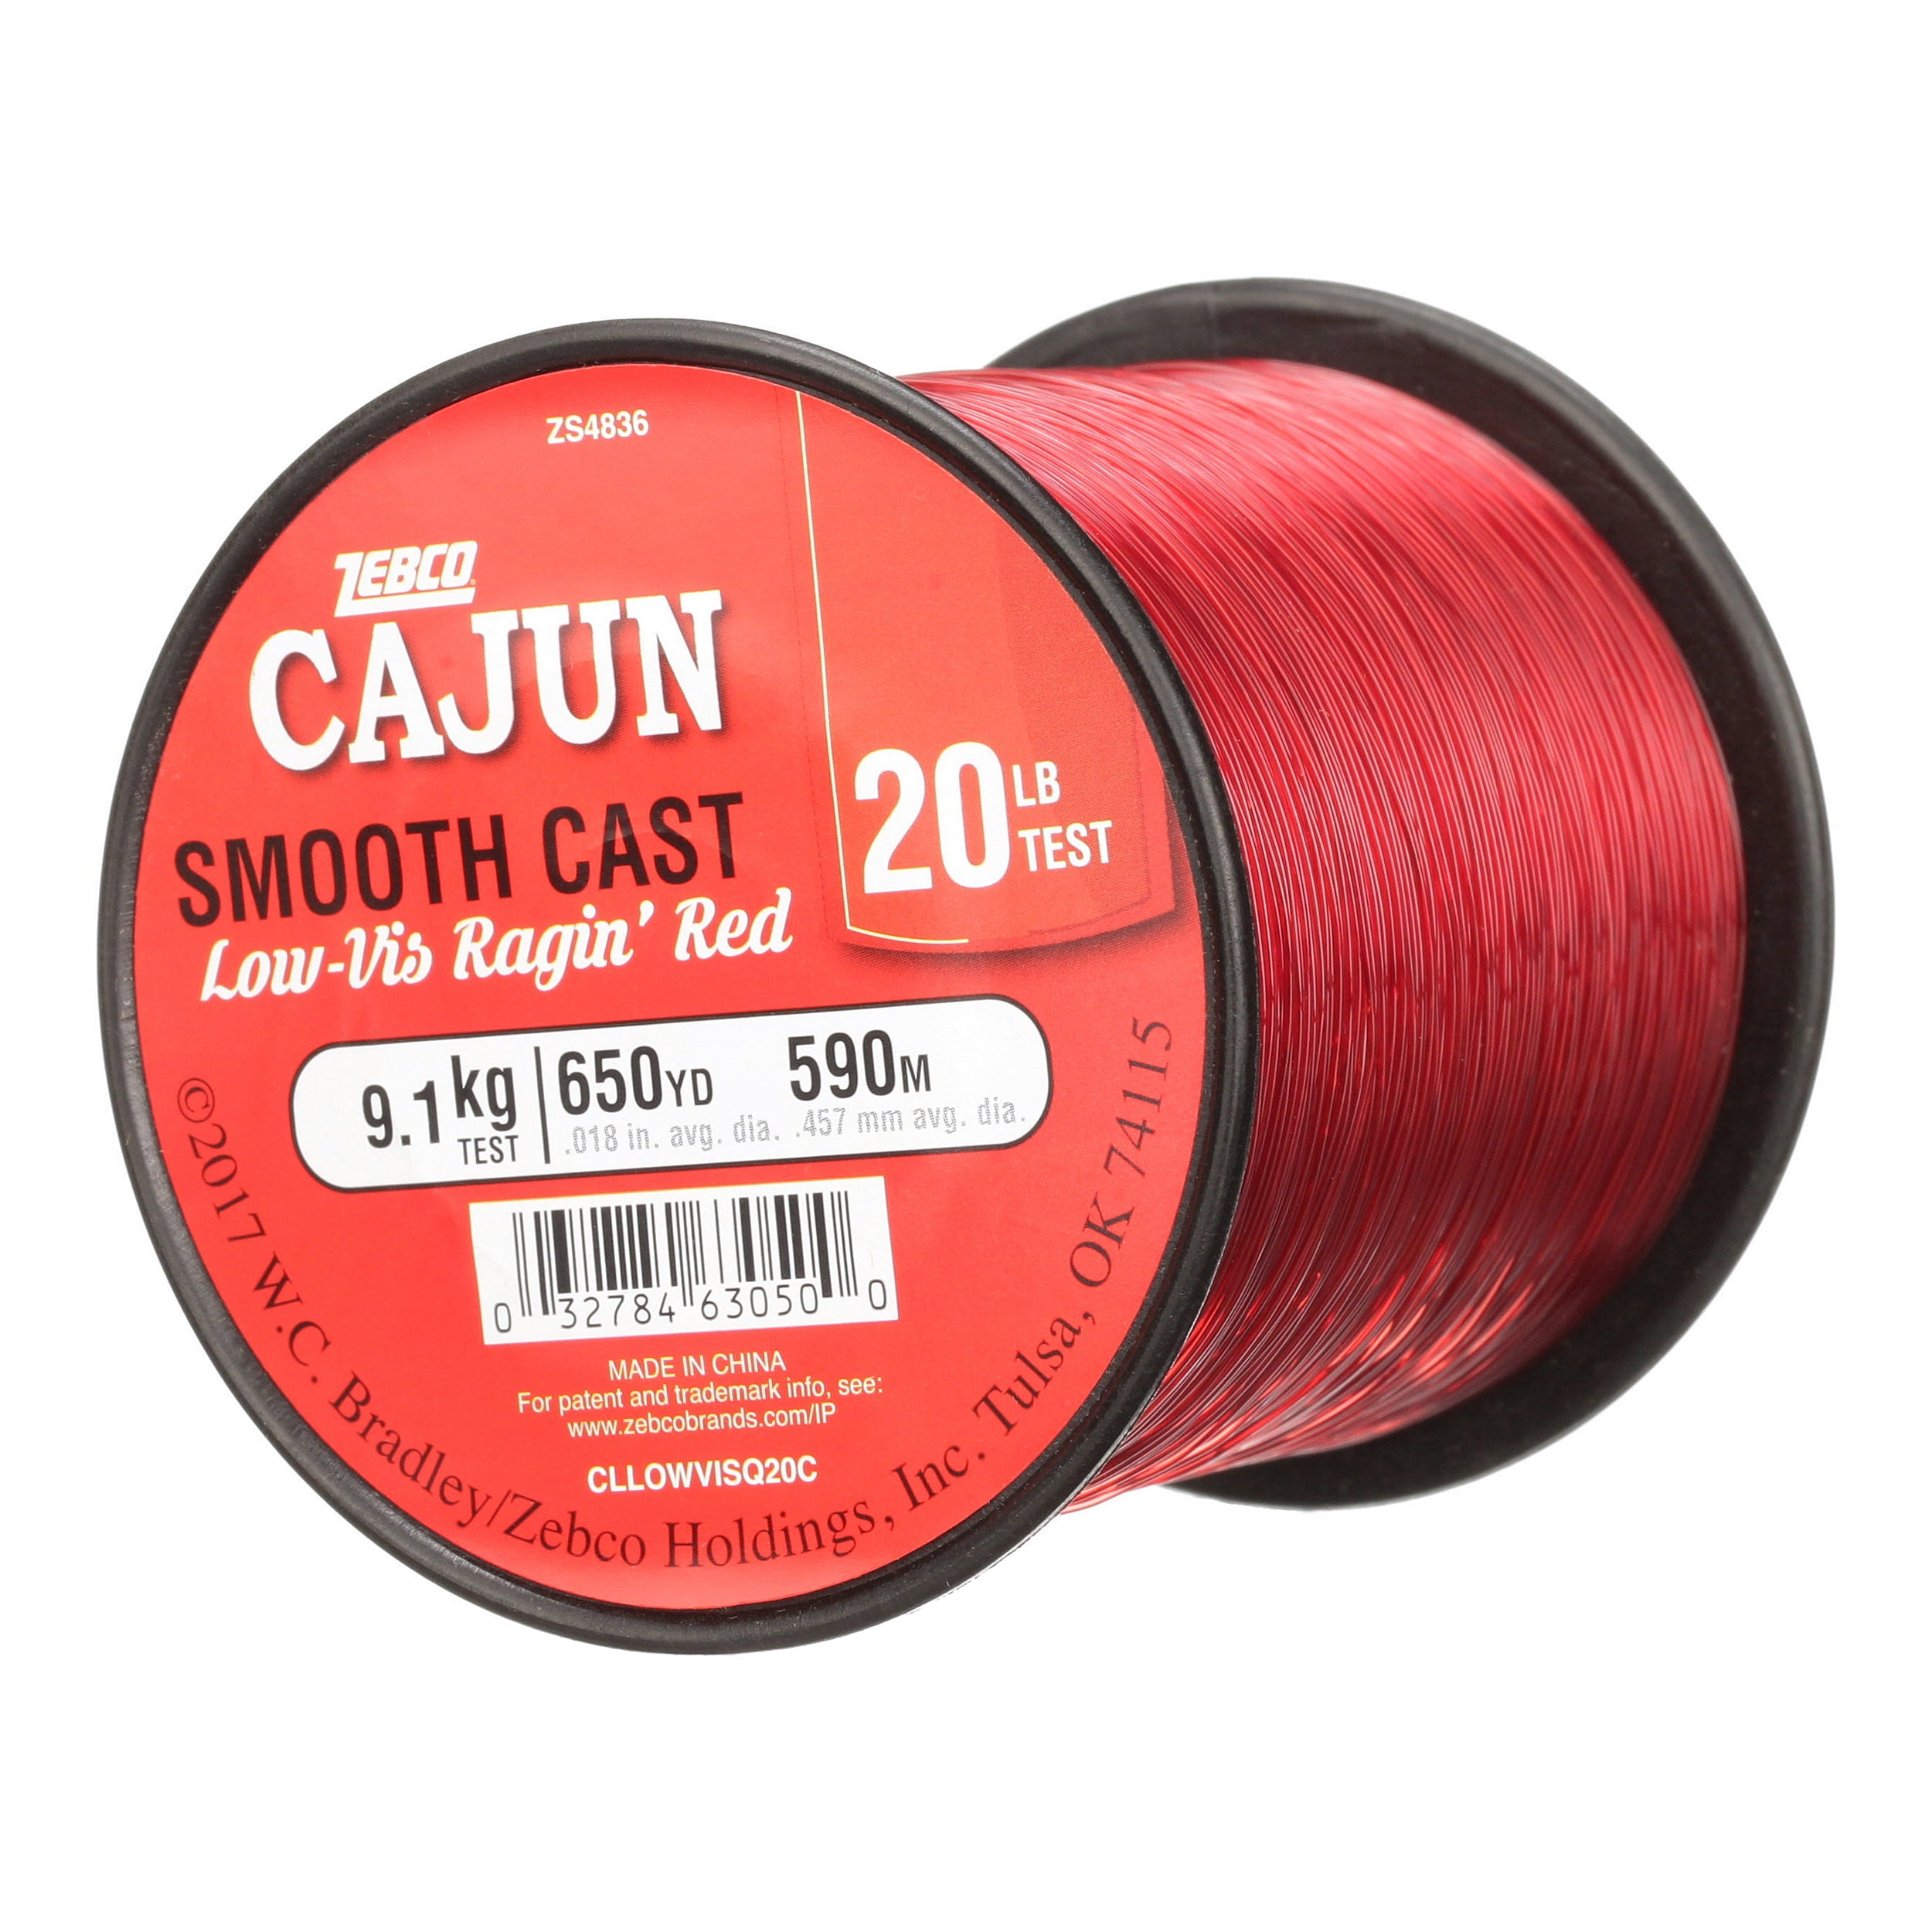 ZEBCO CAJUN LINE RED CAST SUPER SMOOTH CASTING 300YD VARIOUS WEIGHTS 